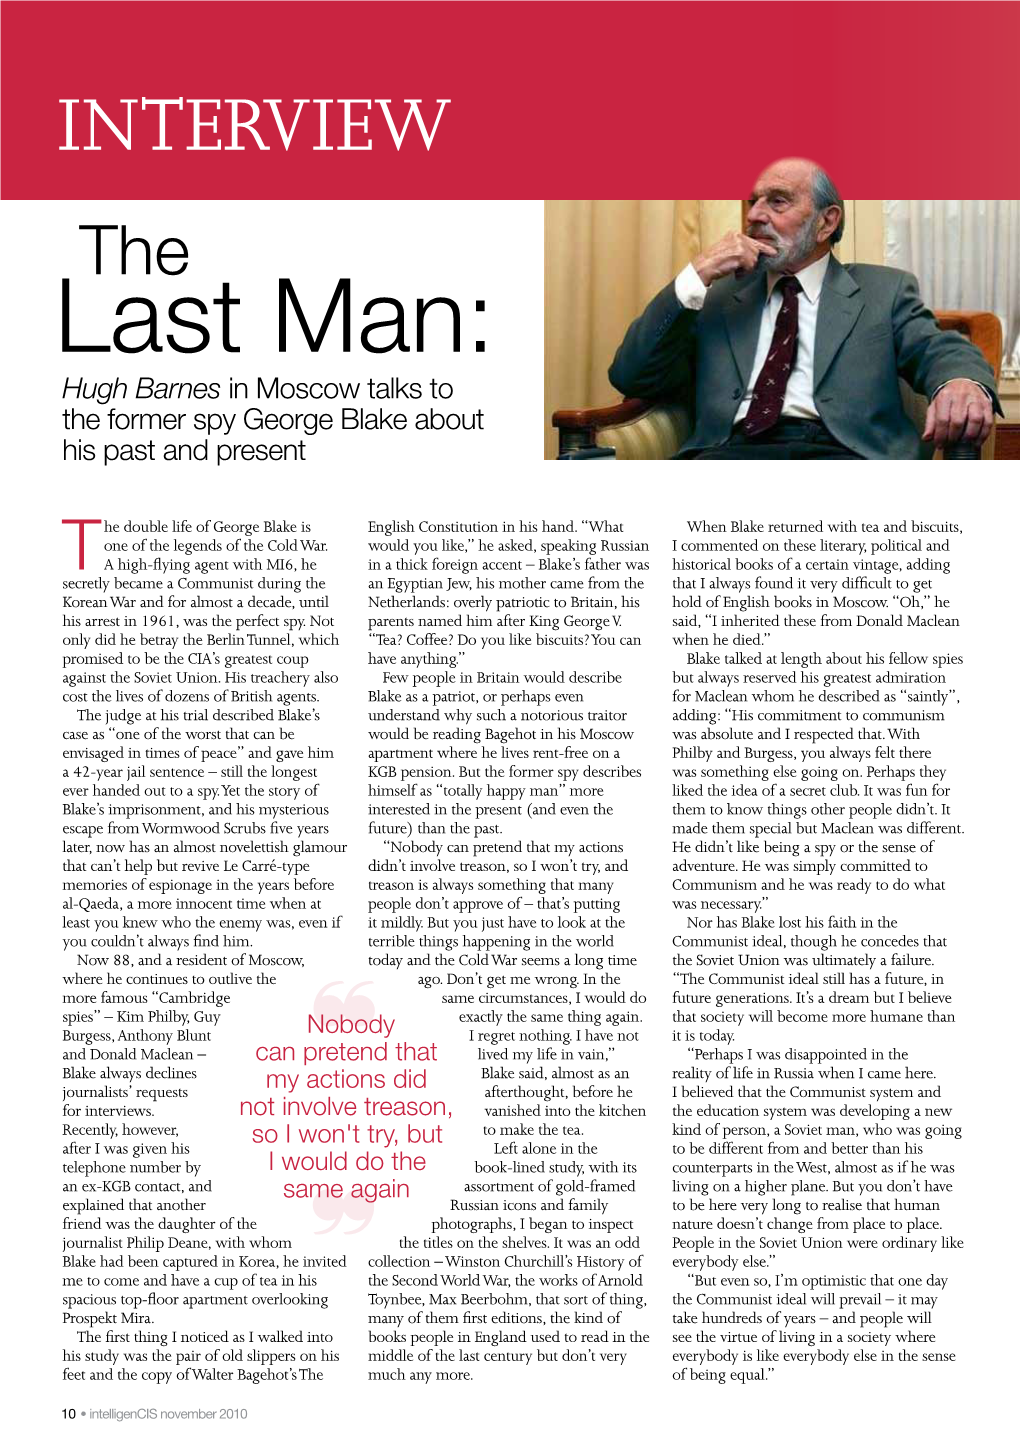 Last Man: Hugh Barnes in Moscow Talks to the Former Spy George Blake About His Past and Present